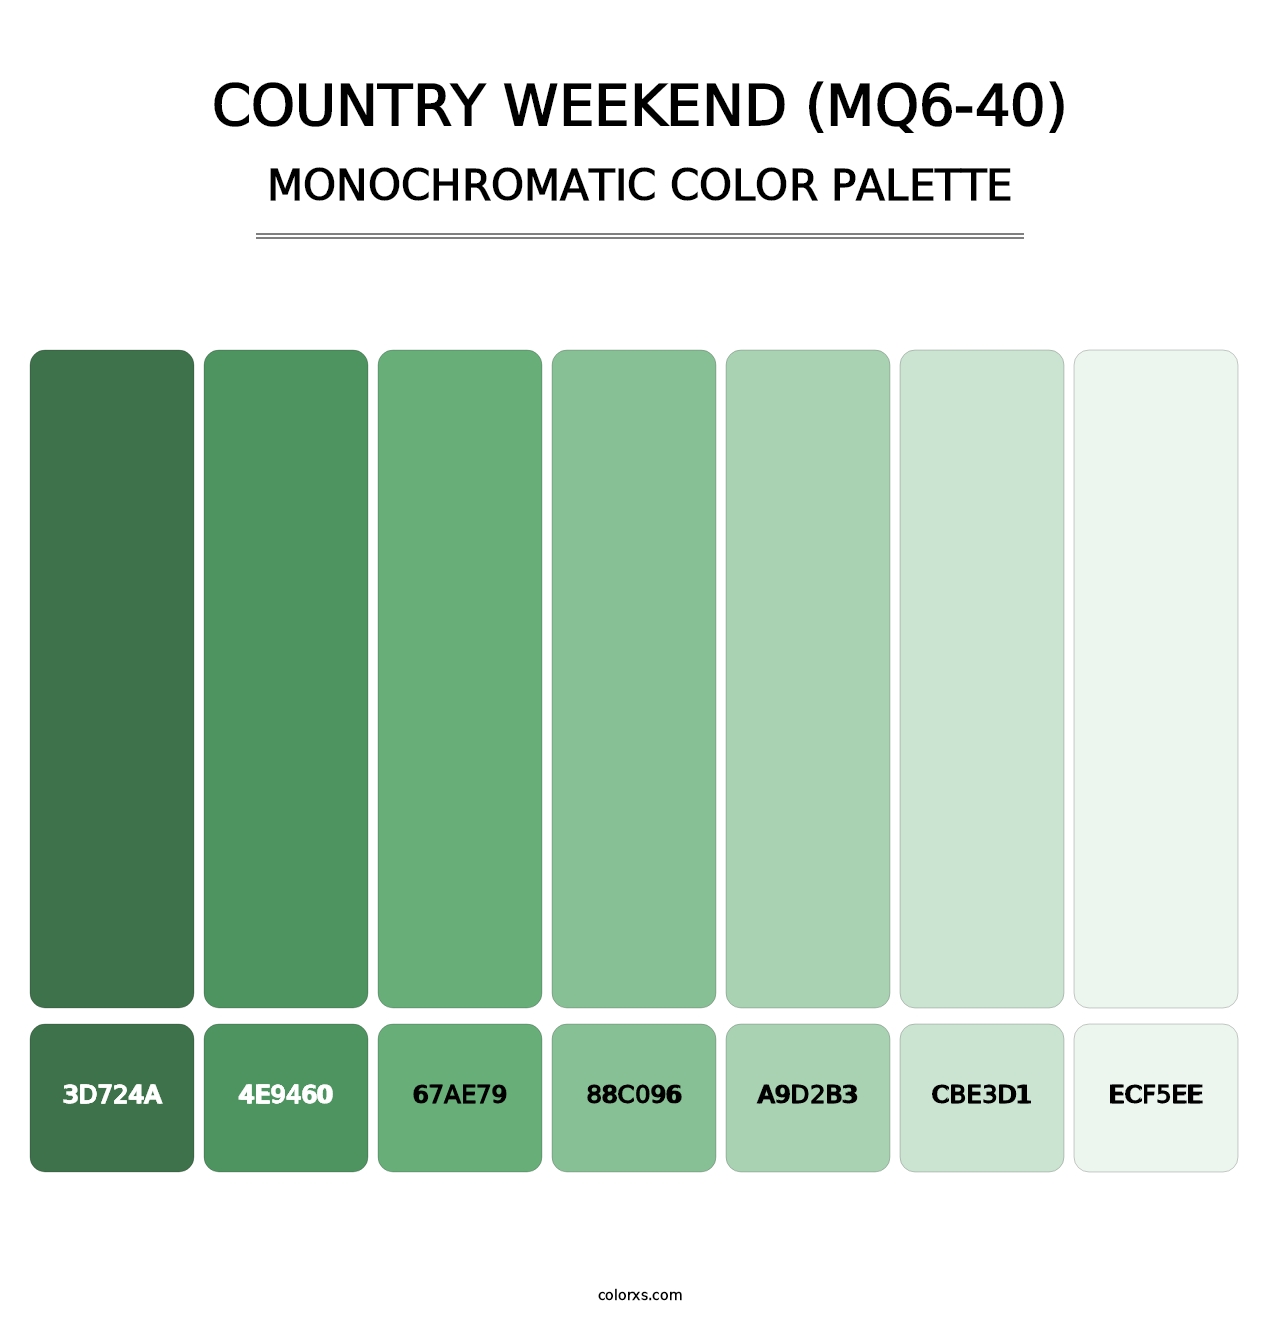 Country Weekend (MQ6-40) - Monochromatic Color Palette